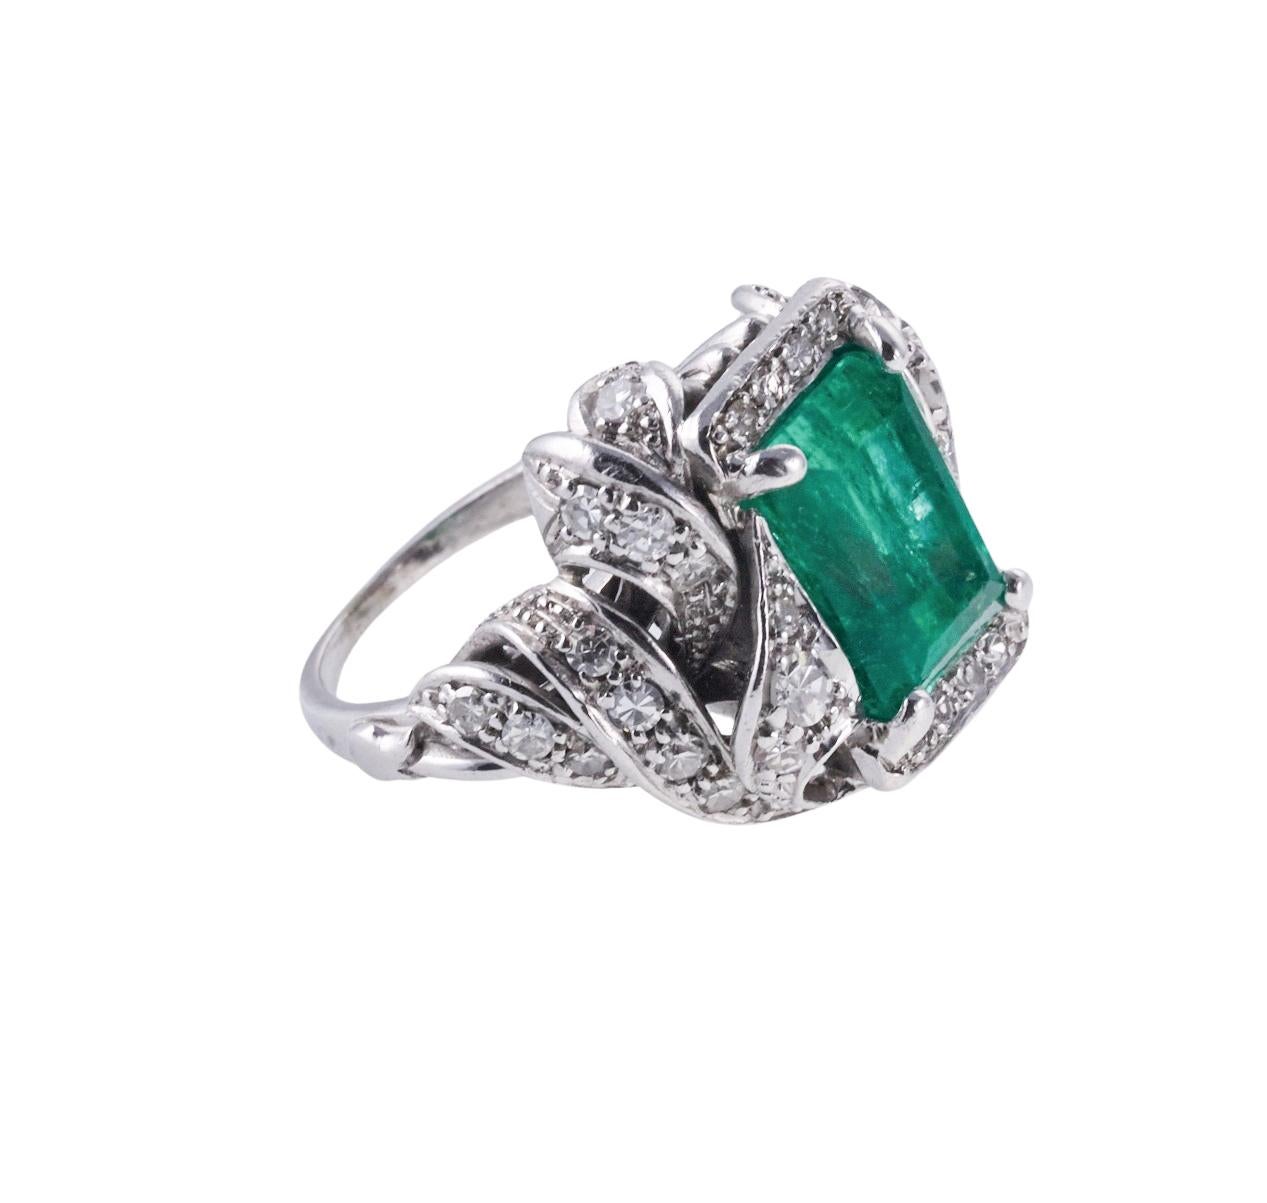 Midcentury 18k white gold cocktail ring, set with center emerald cut emerald - approx. 4.77ct (stone measures 10.9 x 8.1 x 7.8mm), surrounded with approx. 0.90ctw SI/H-I diamonds. Ring size 5, top of the ring measures 20mm x 21mm. Marked k18. Weight